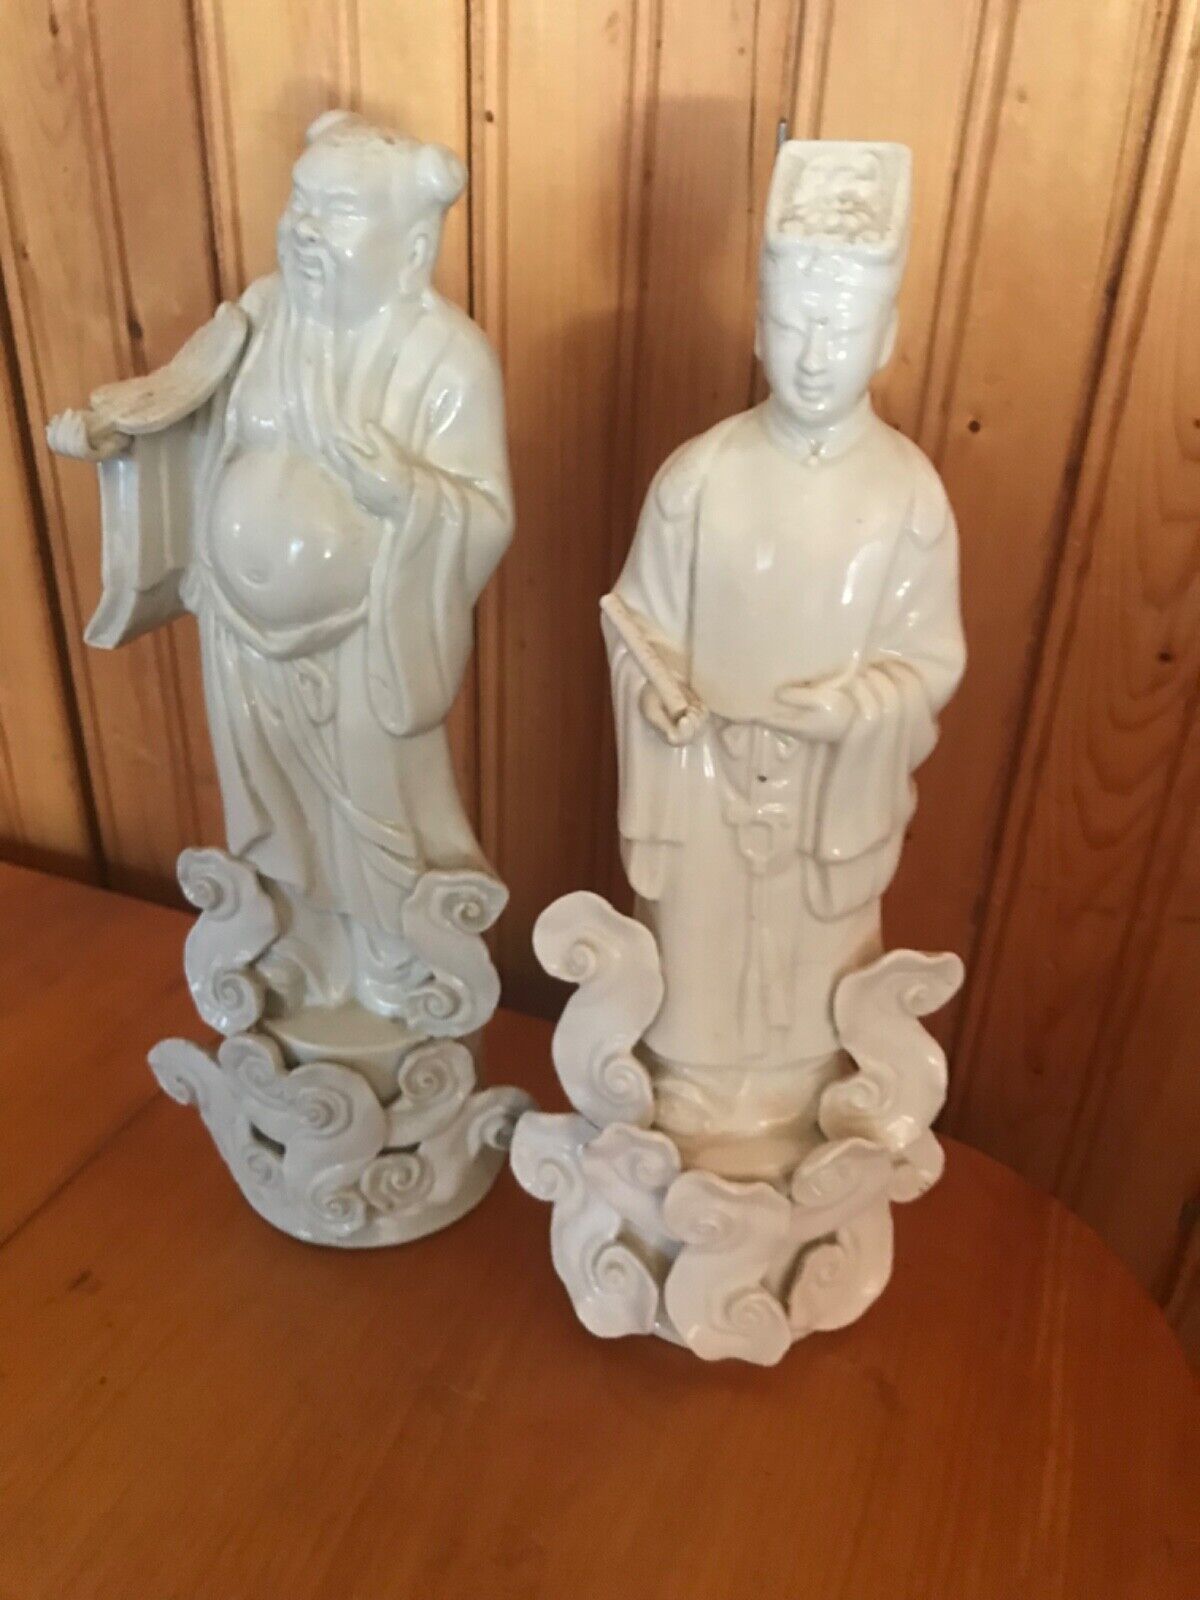 2 VINTAGE CHINESE WHITE GLAZED FIGURINES 10” tall